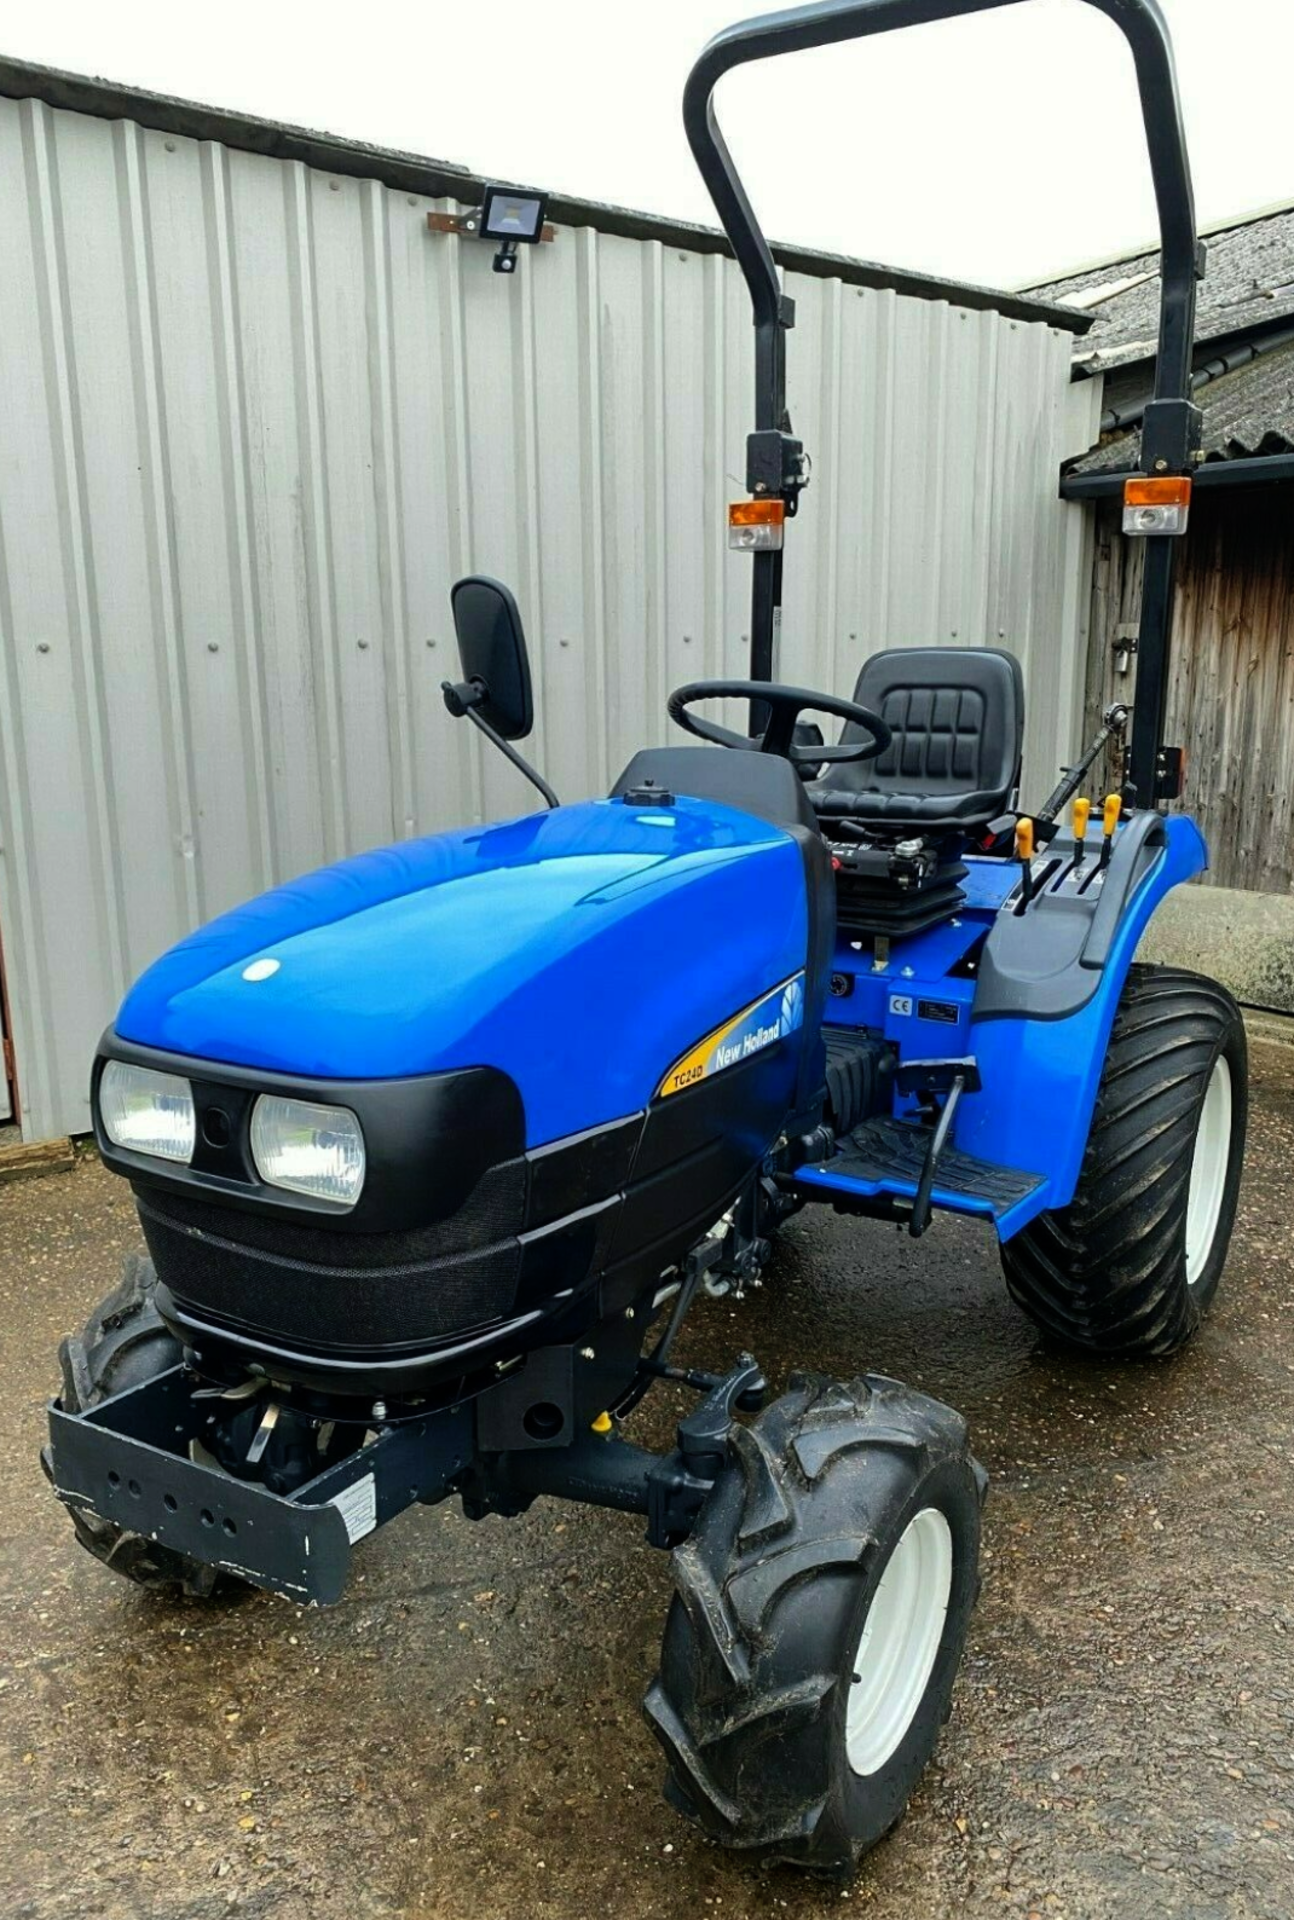 MINT 2010 NEW HOLLAND NH TC24D 4 X 4 368 HOURS ! MUST SEE ! - Image 2 of 8